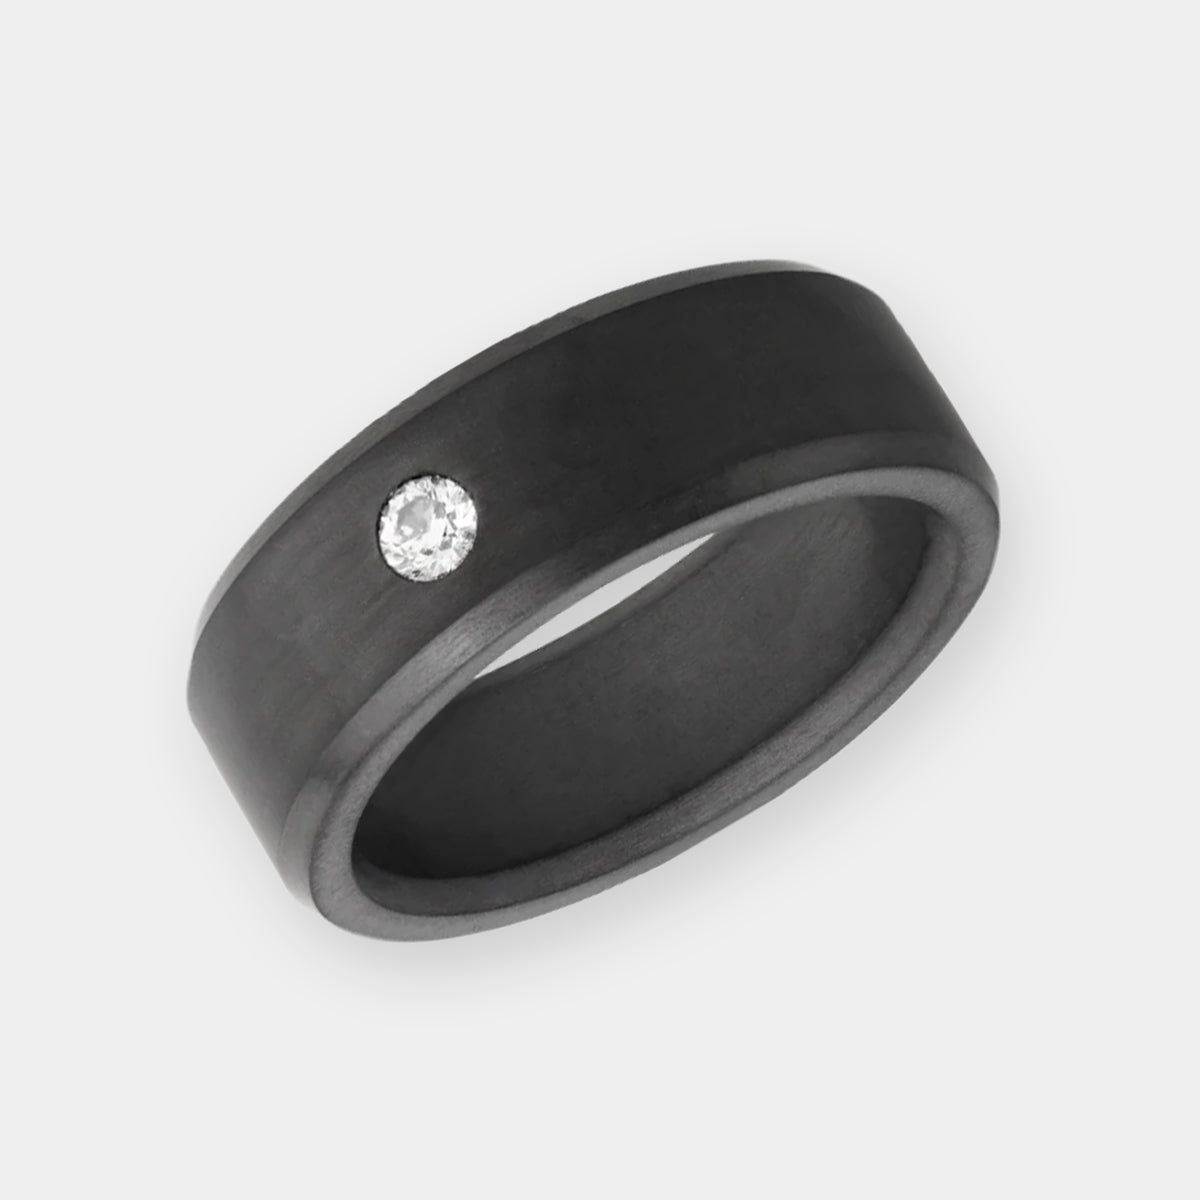 Solid Black Diamond Ring with White Diamond Inset on White Background | Elysium Black Diamond Ring - Ares 8mm | Men's Crushed Diamond Ring | Products | Image 1